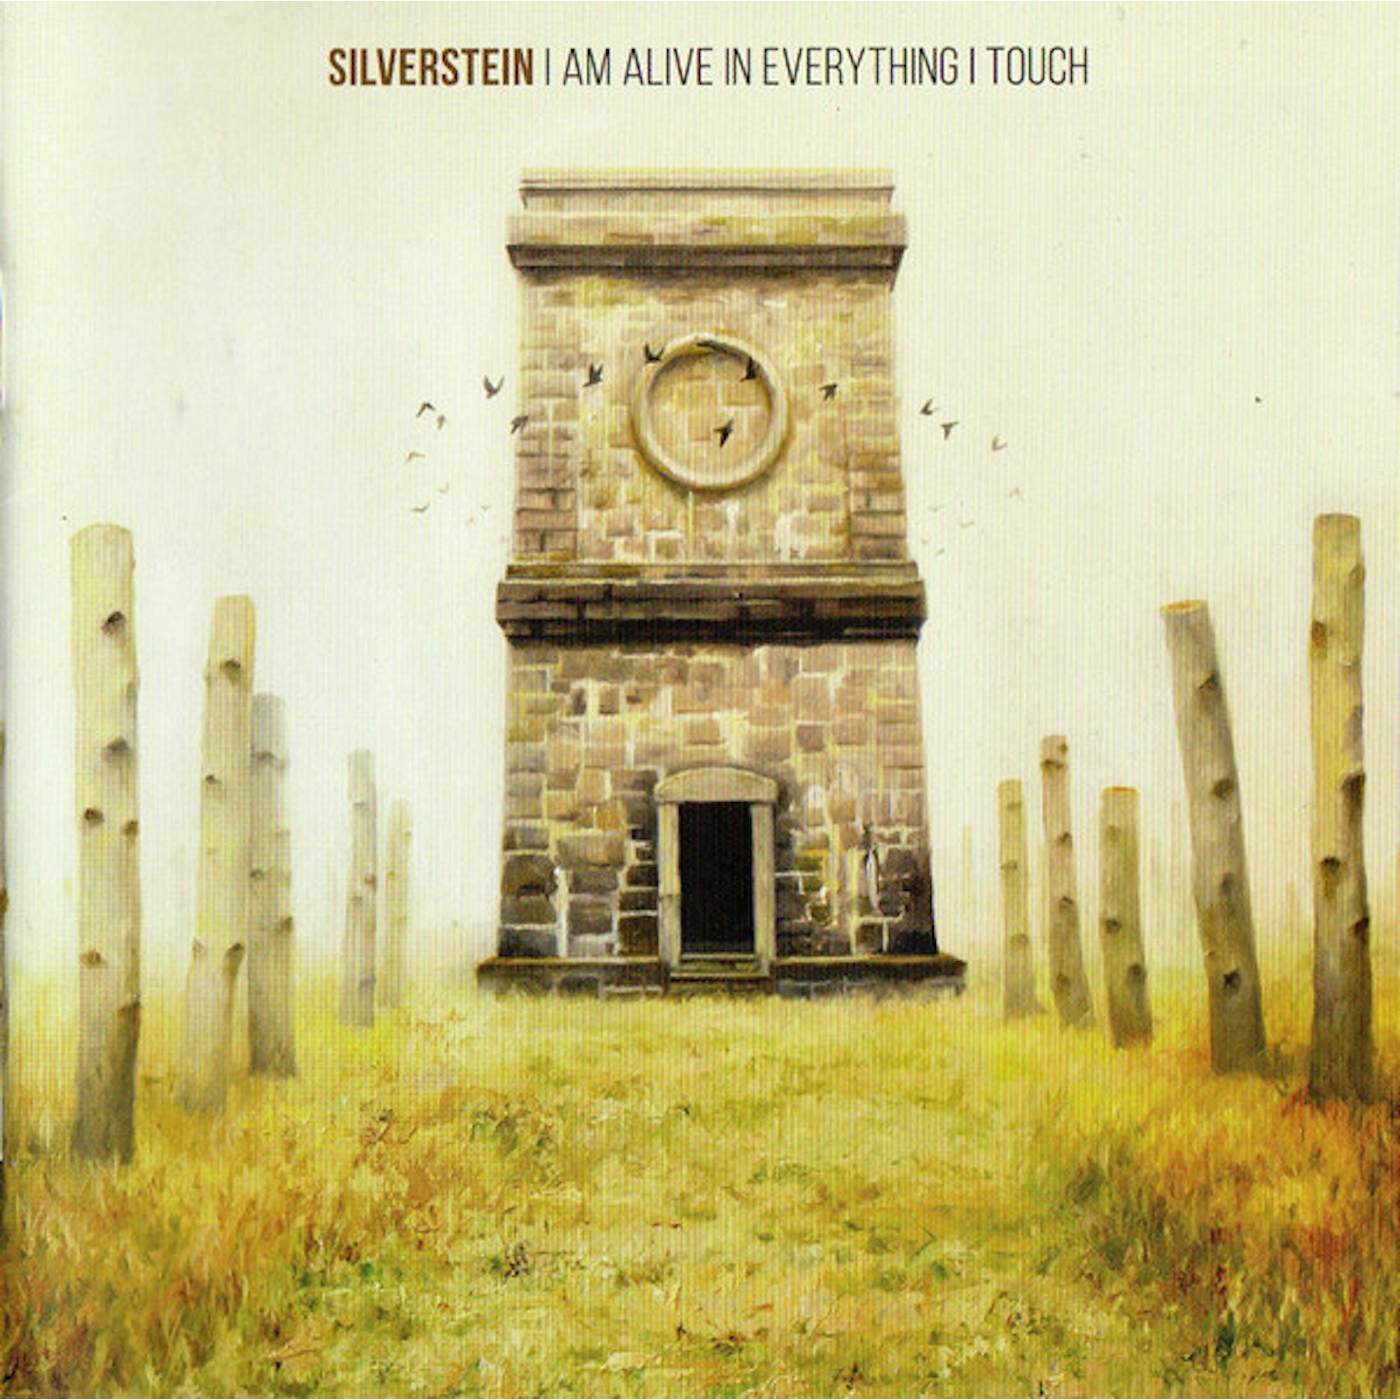 Silverstein I AM ALIVE IN EVERYTHING I TOUCH CD